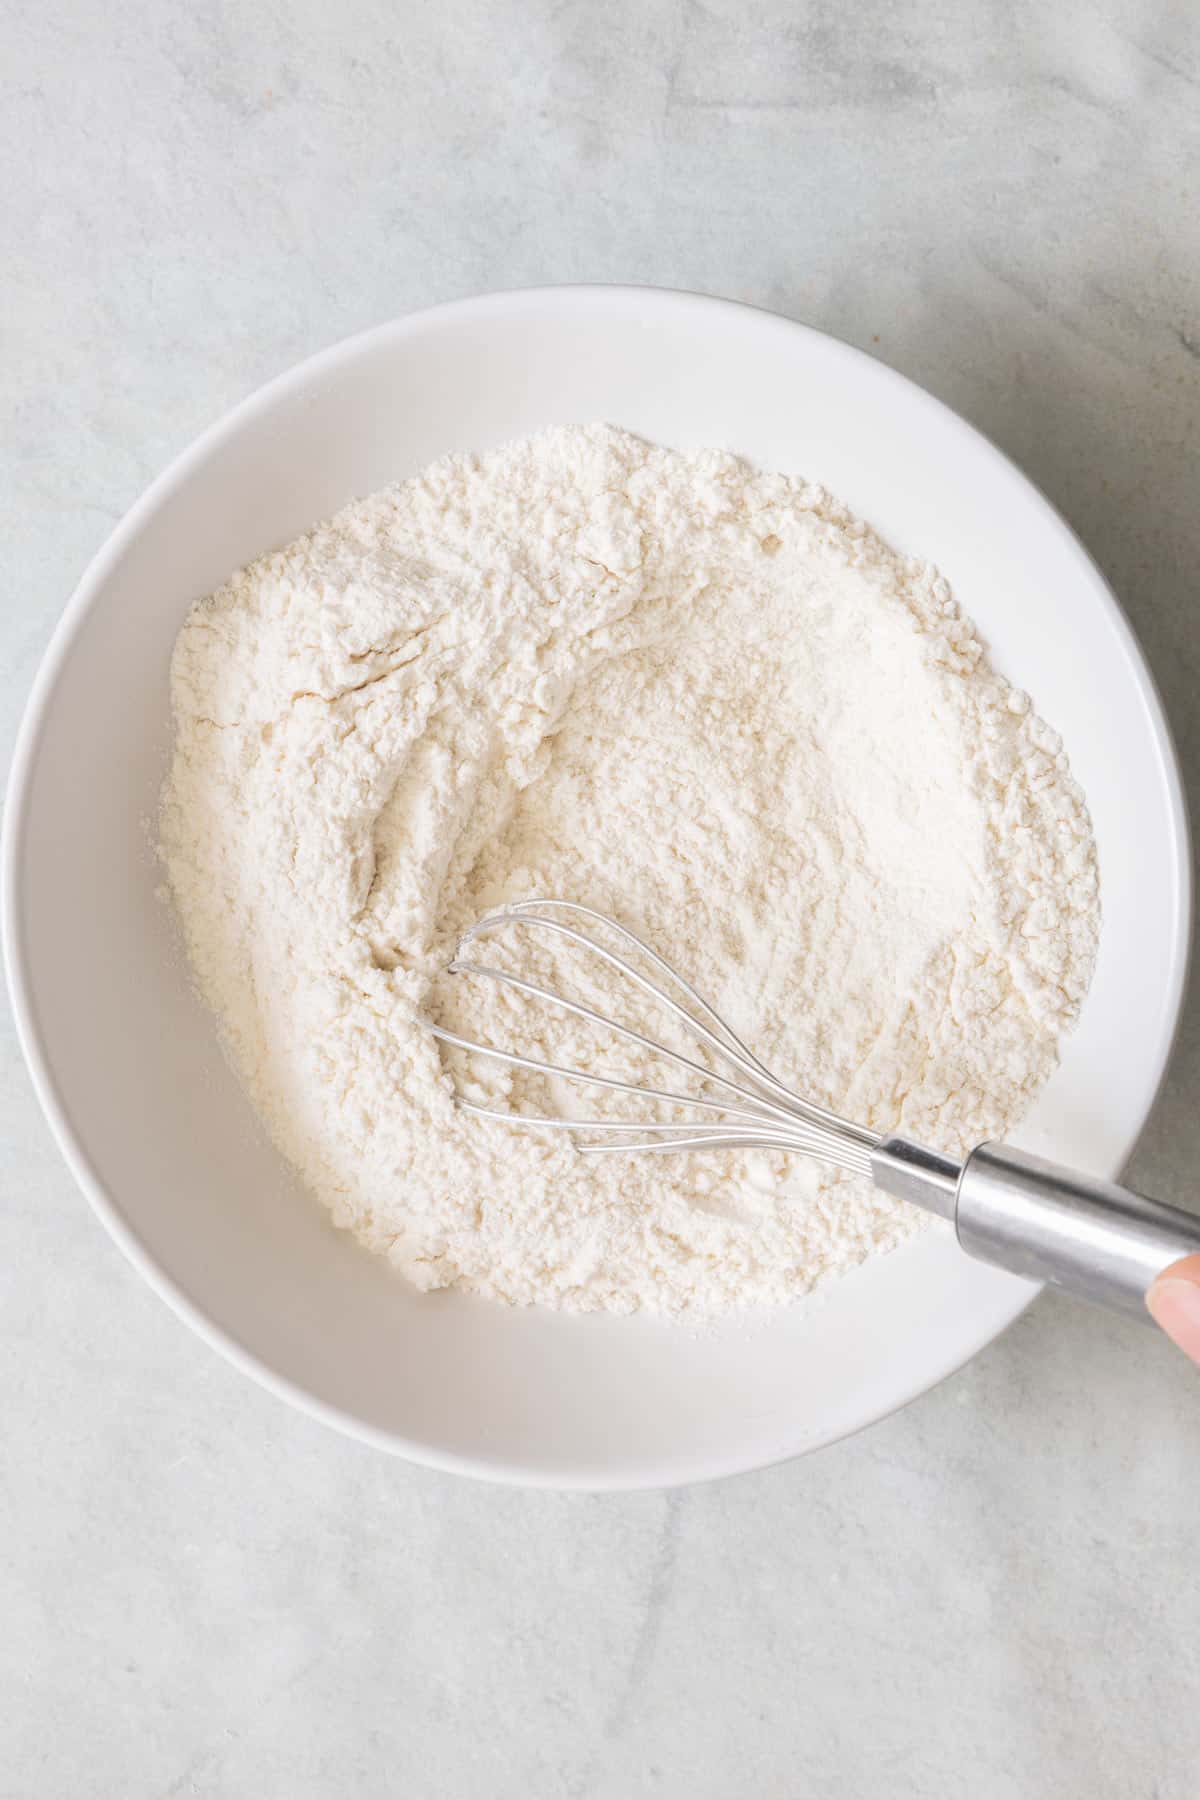 Whisking flour with baking powder and salt in a small white bowl.